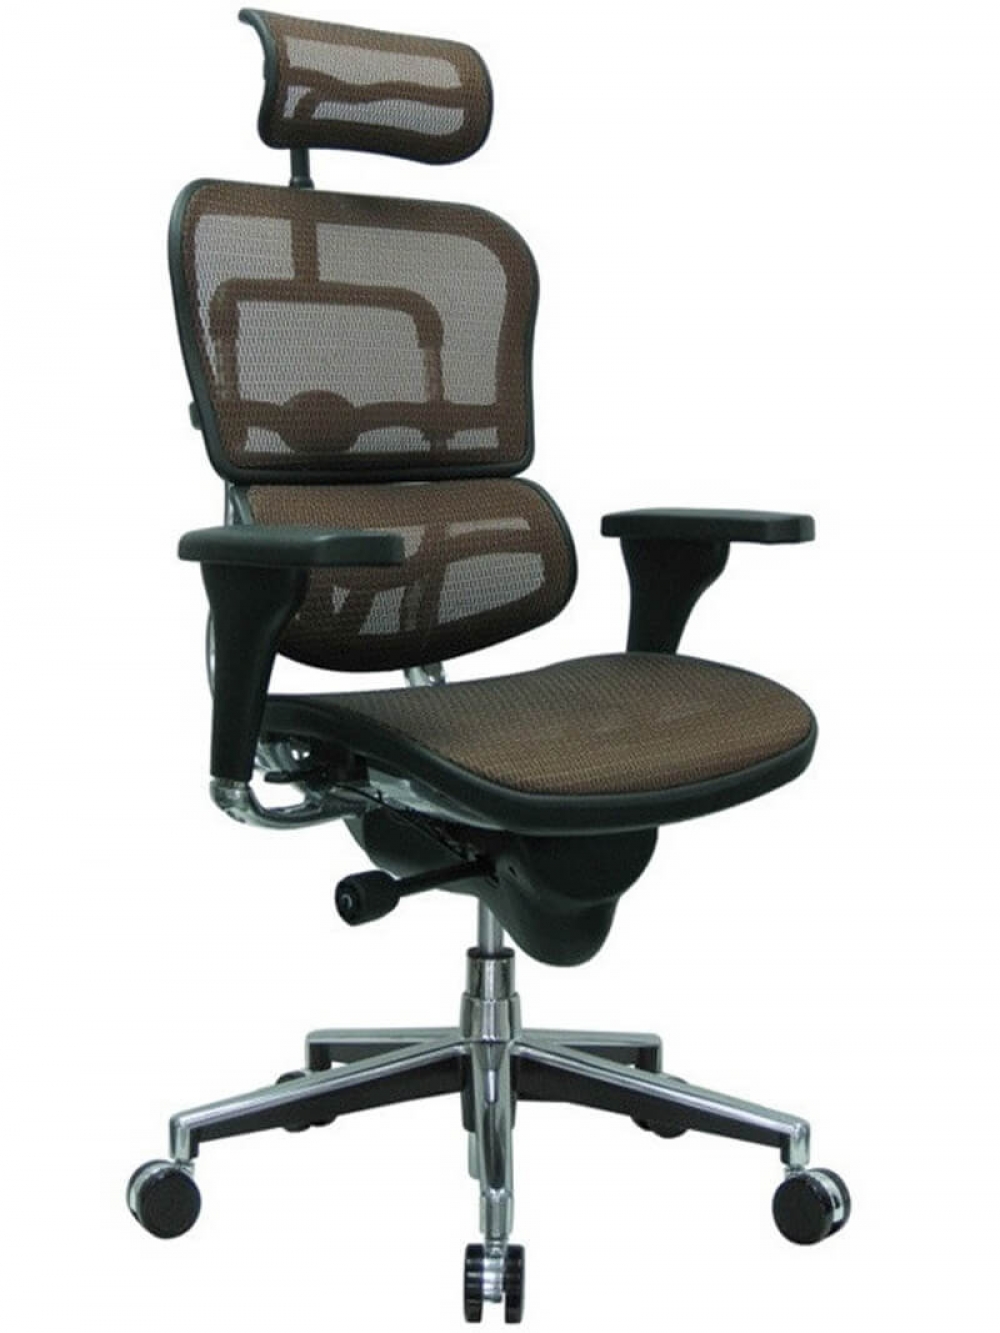 Executive chairs and conference chairs cub me7erg km 13 eur